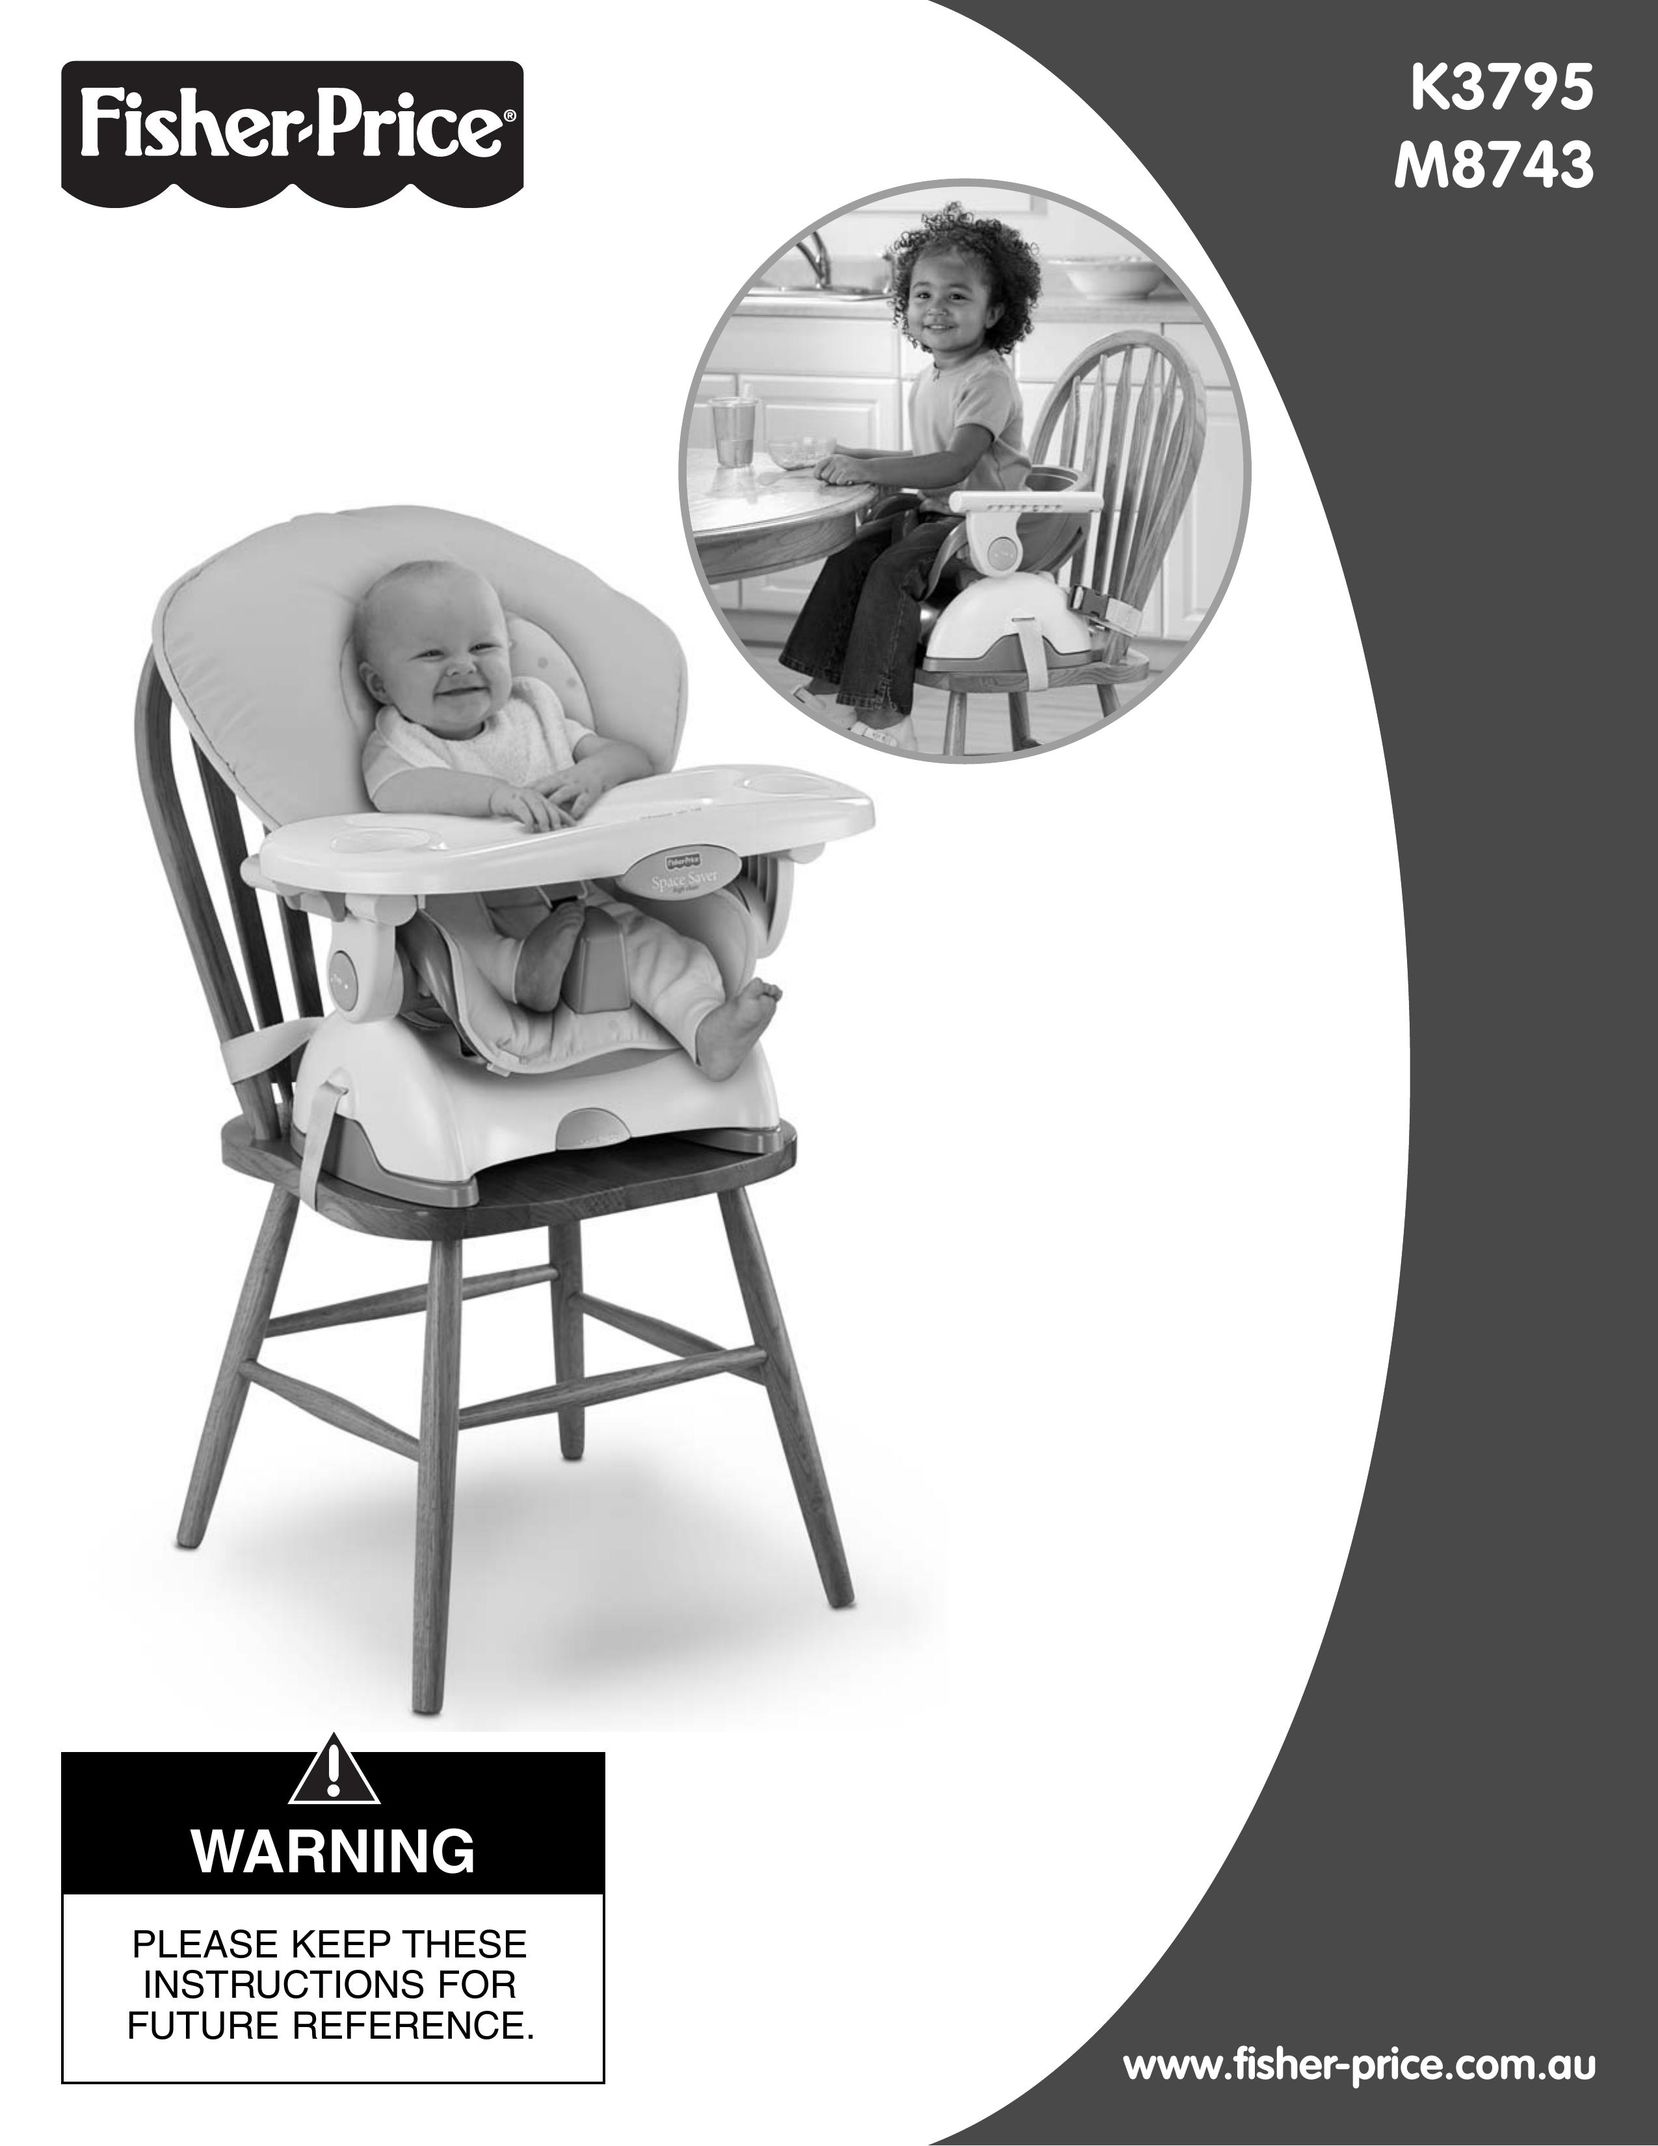 Fisher-Price M8743 High Chair User Manual